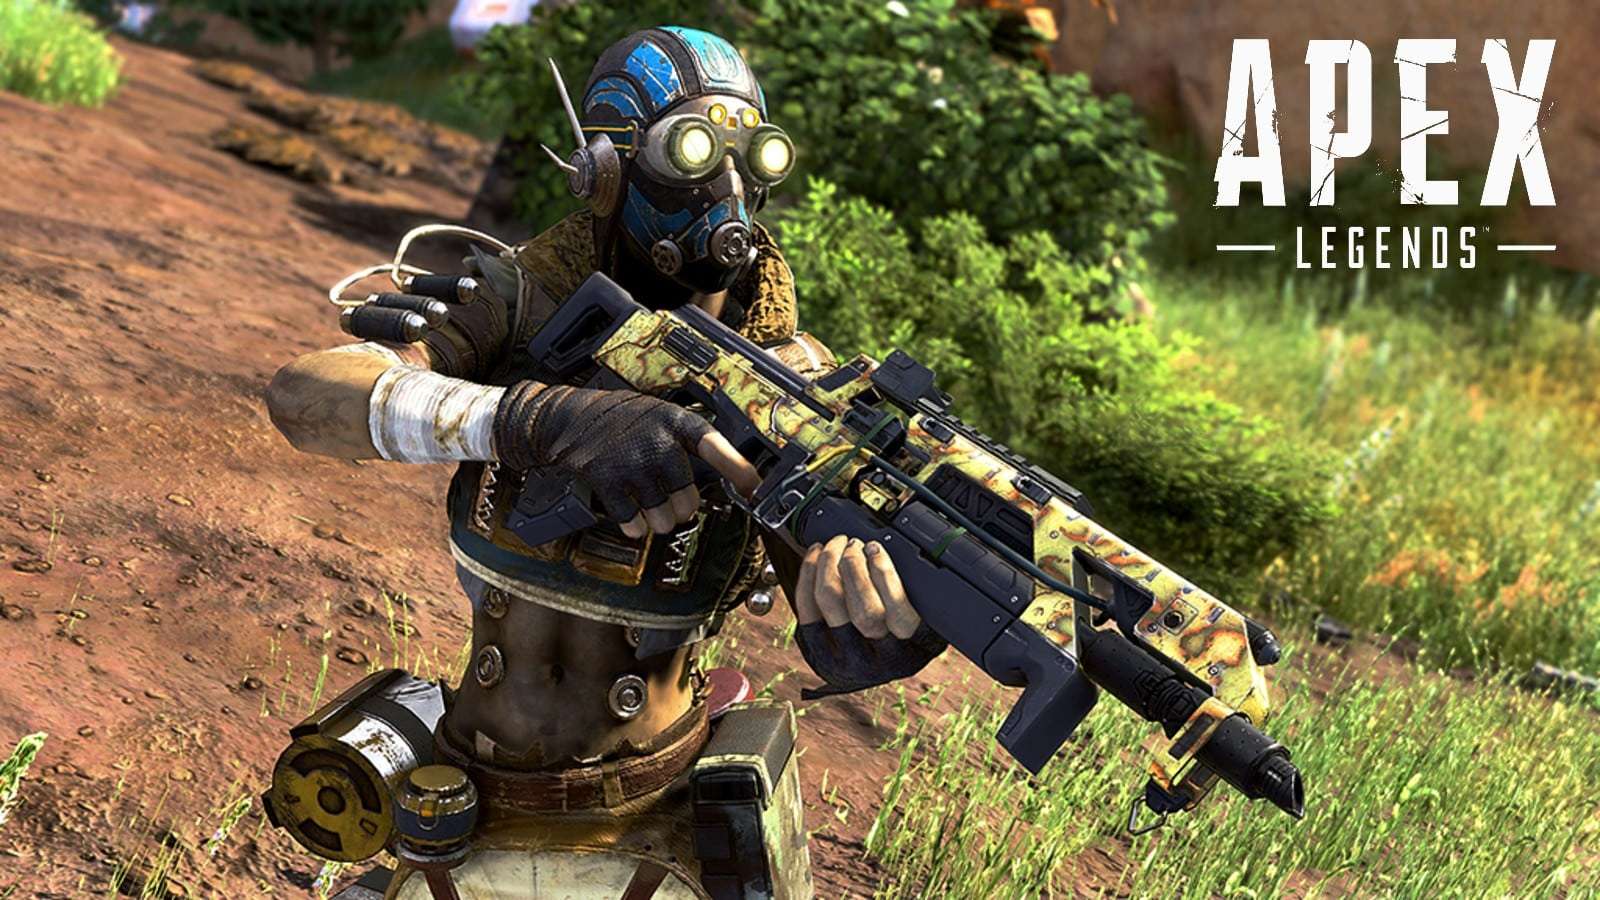 Cheater banned live on stream Apex Legends